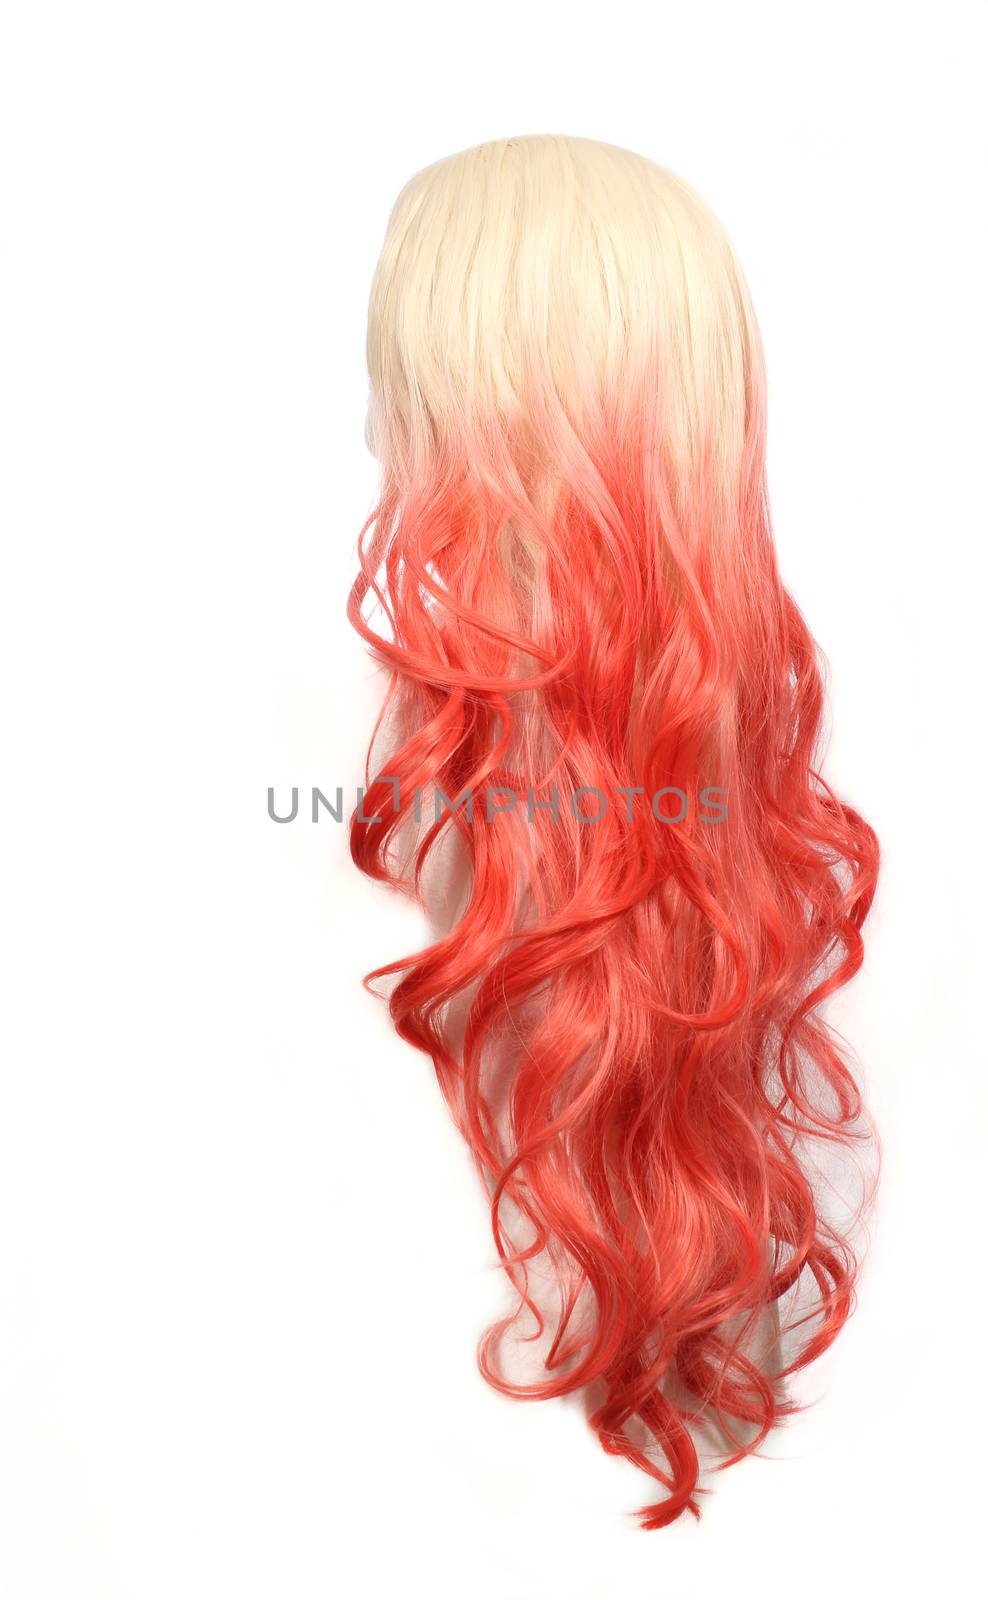 Blond and Orange Ombre Wig on Mannequin head, White Background